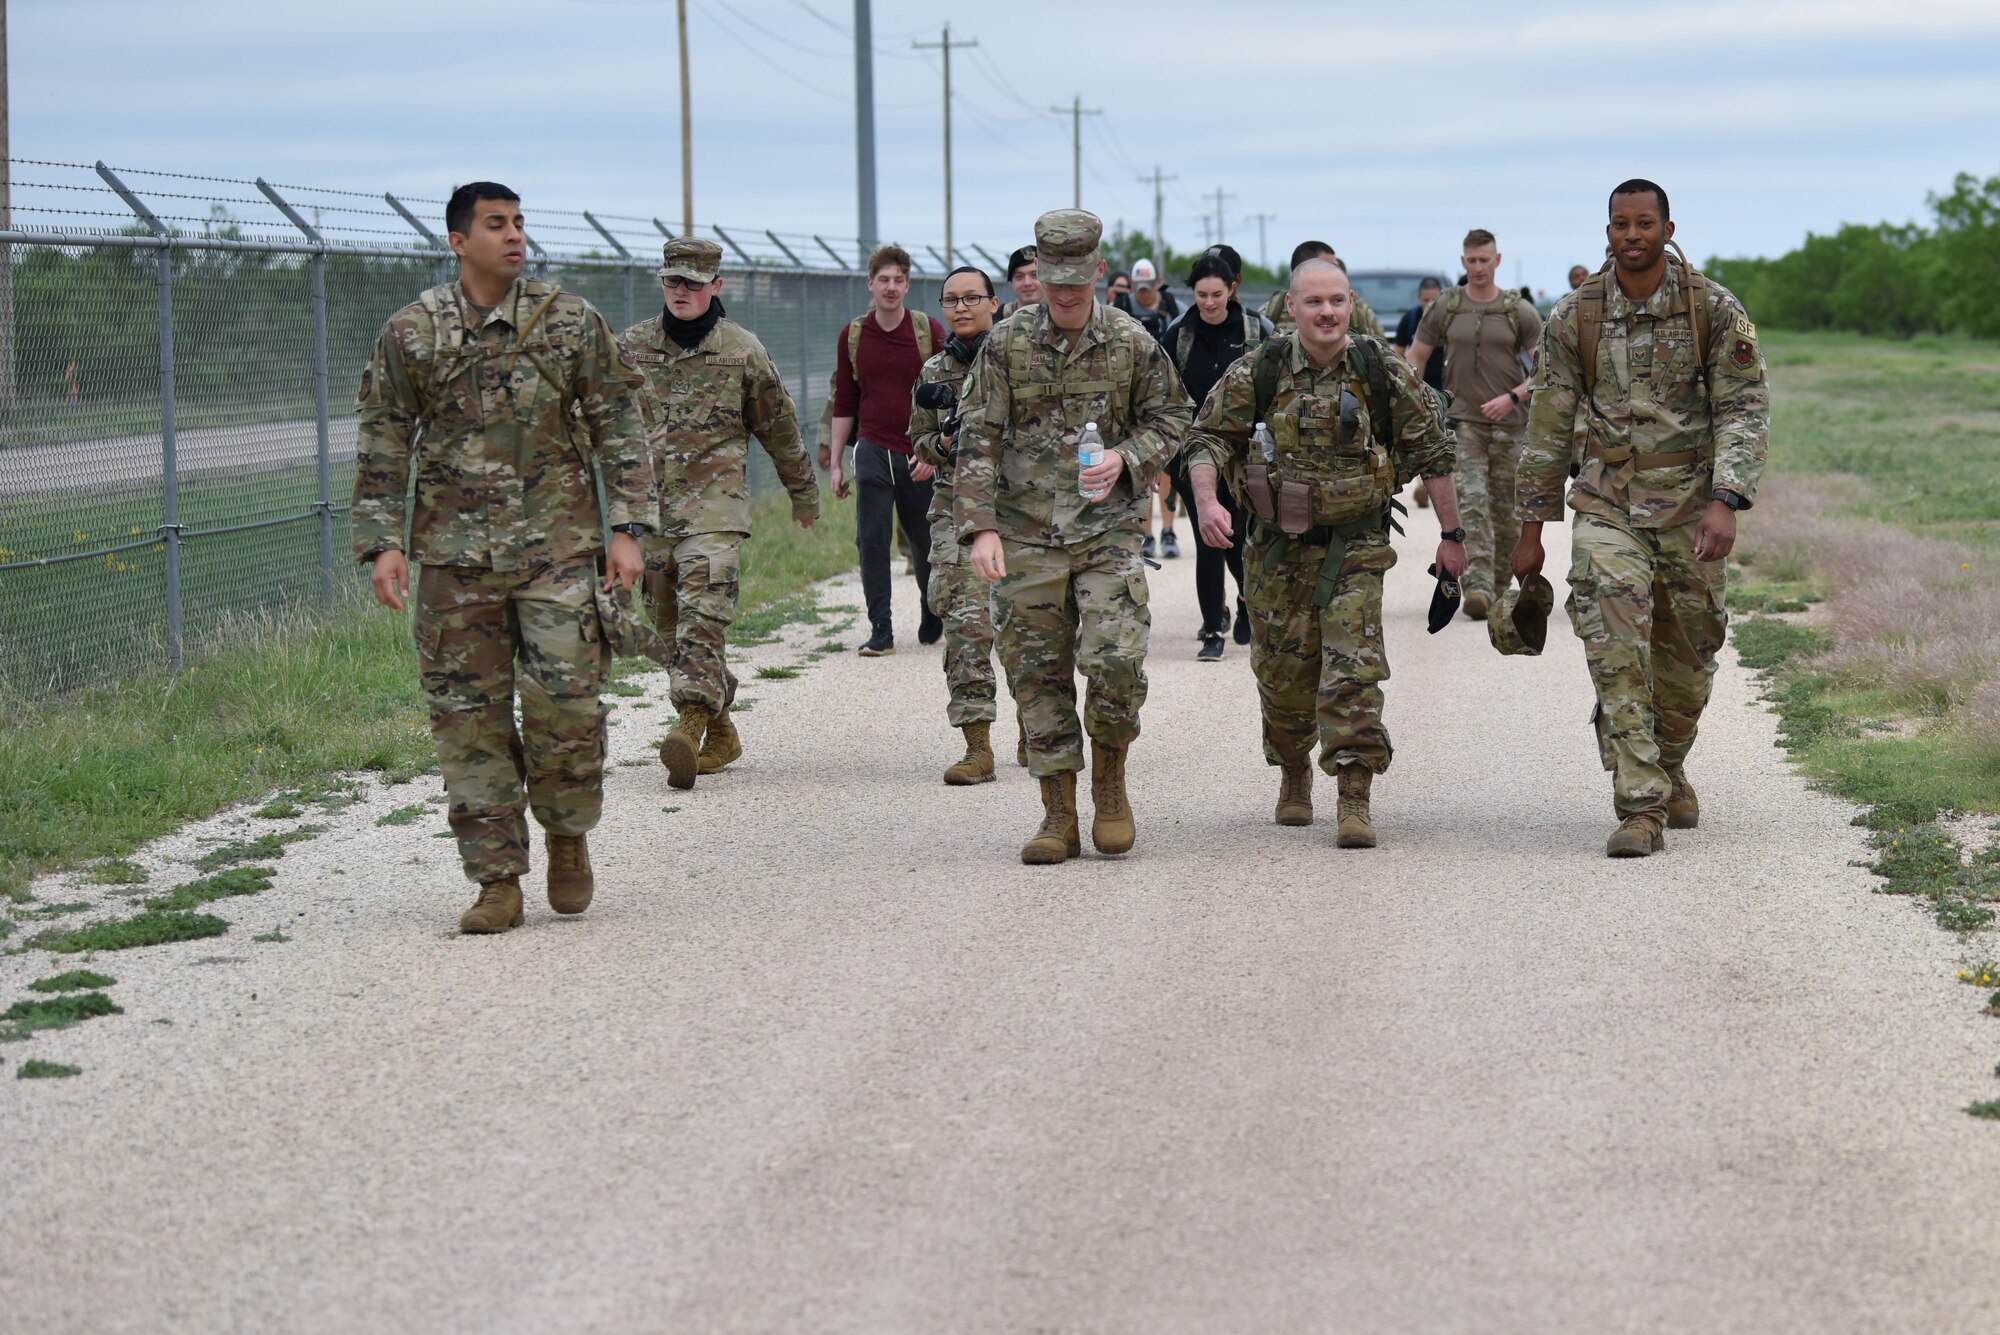 Goodfellow members finish the last portion of a ruck during National Police Week on Goodfellow Air Force Base, Texas, May 10, 2021. After the ruck a pancake breakfast was held for all of the participants. (U.S. Air Force photo by Staff Sgt. Seraiah Wolf)